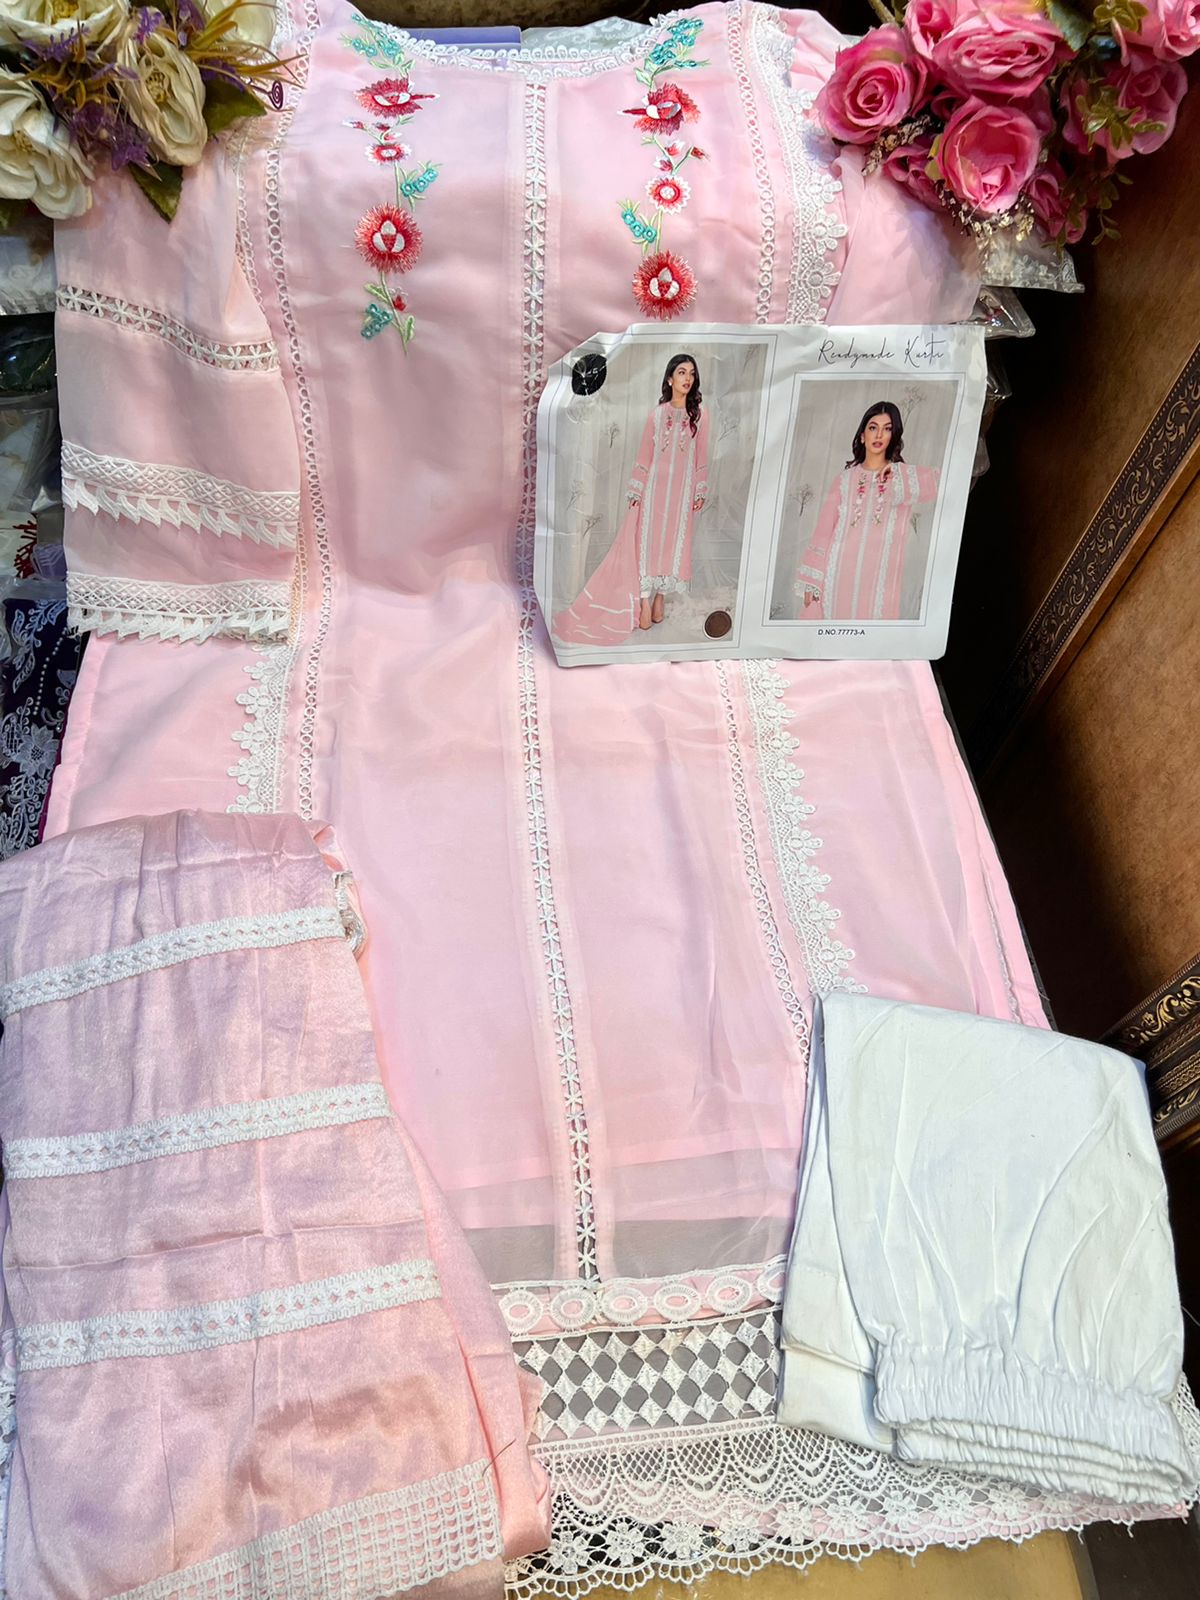 MEHBOOB TEX 77773 A PINK READYMADE TUNIC COLLECTION